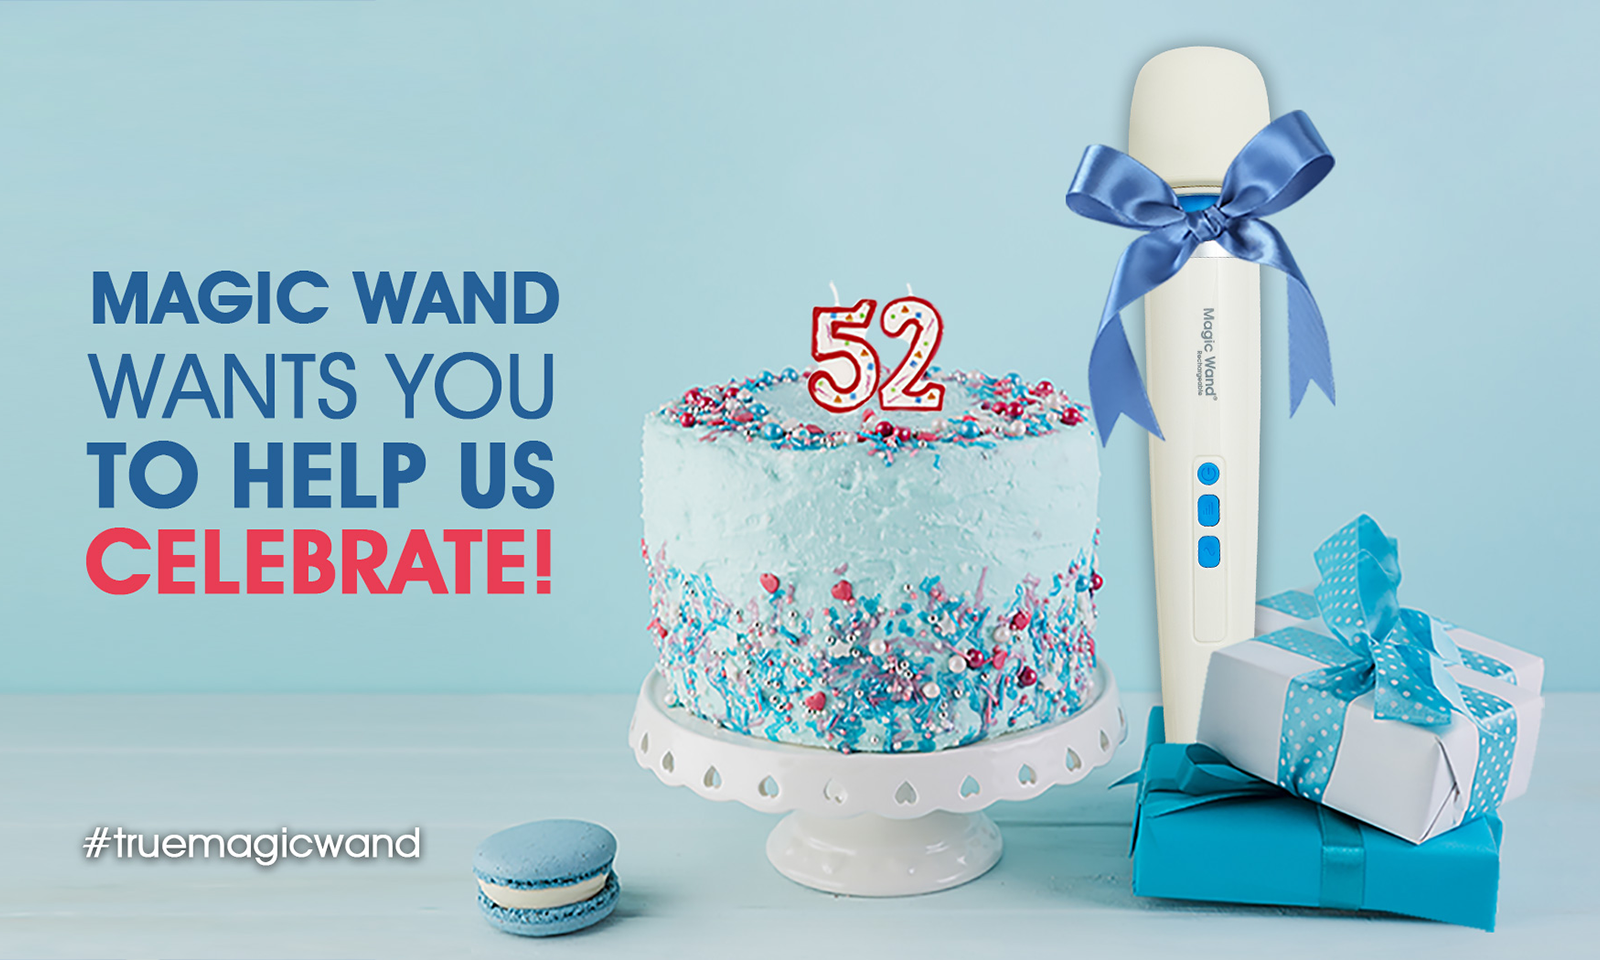 Everyone's Invited To Join Magic Wand’s Birthday Celebration